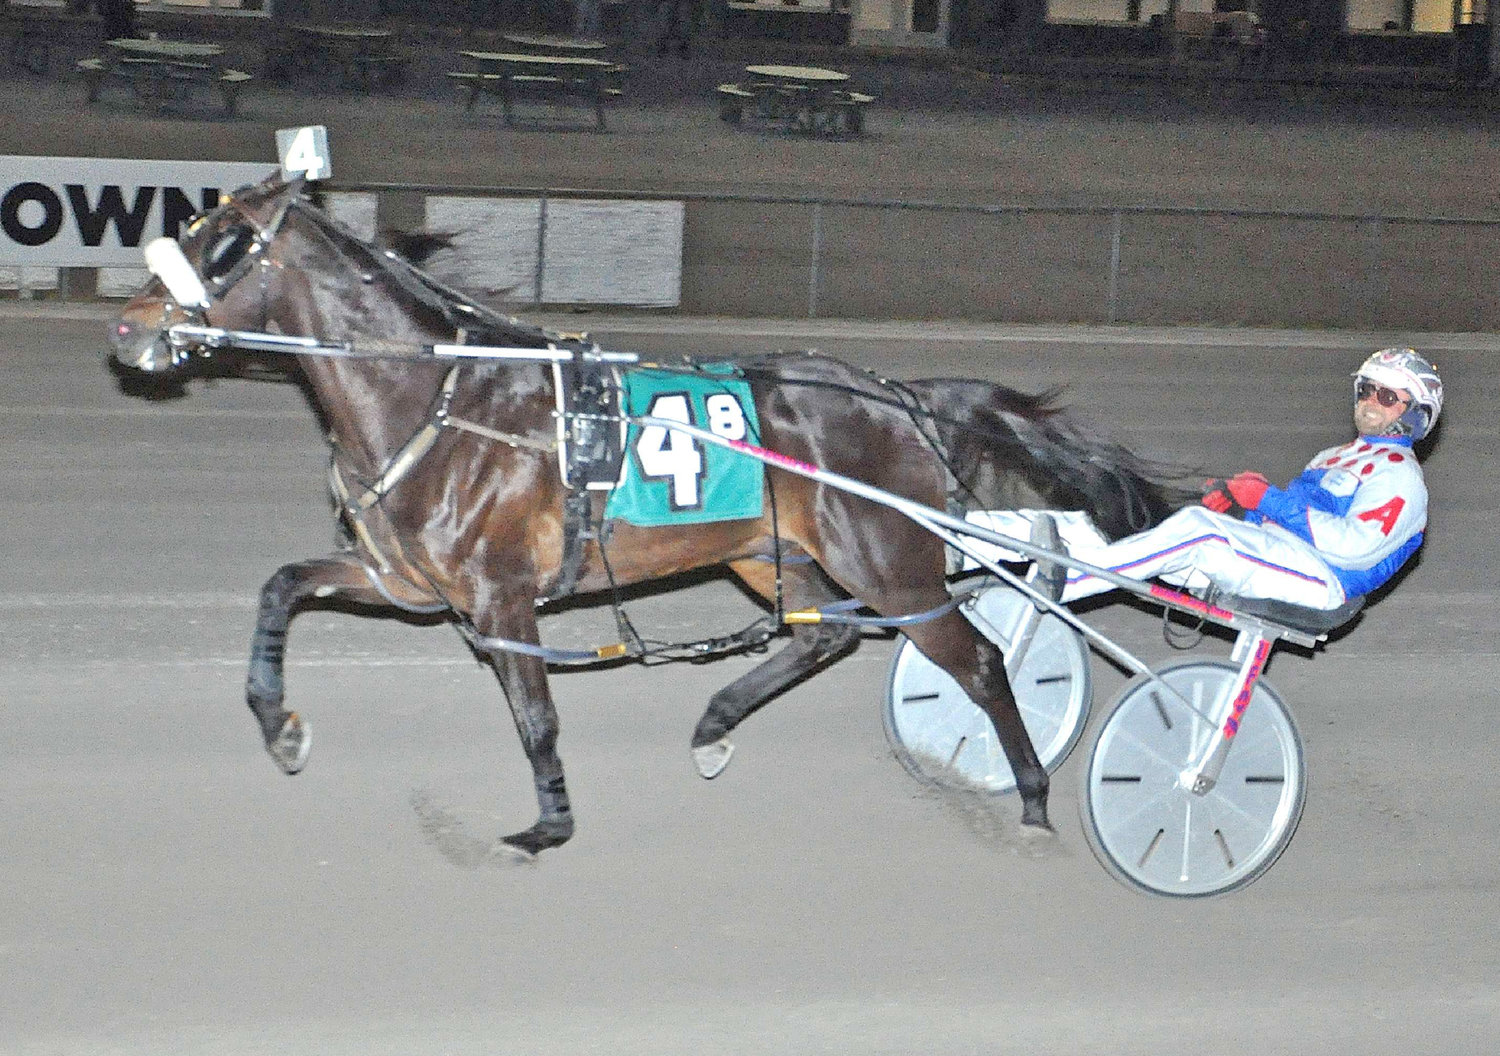 Chatelroll and driver Frank Affrunti charged to a late to win the $7,000 Open Pace.